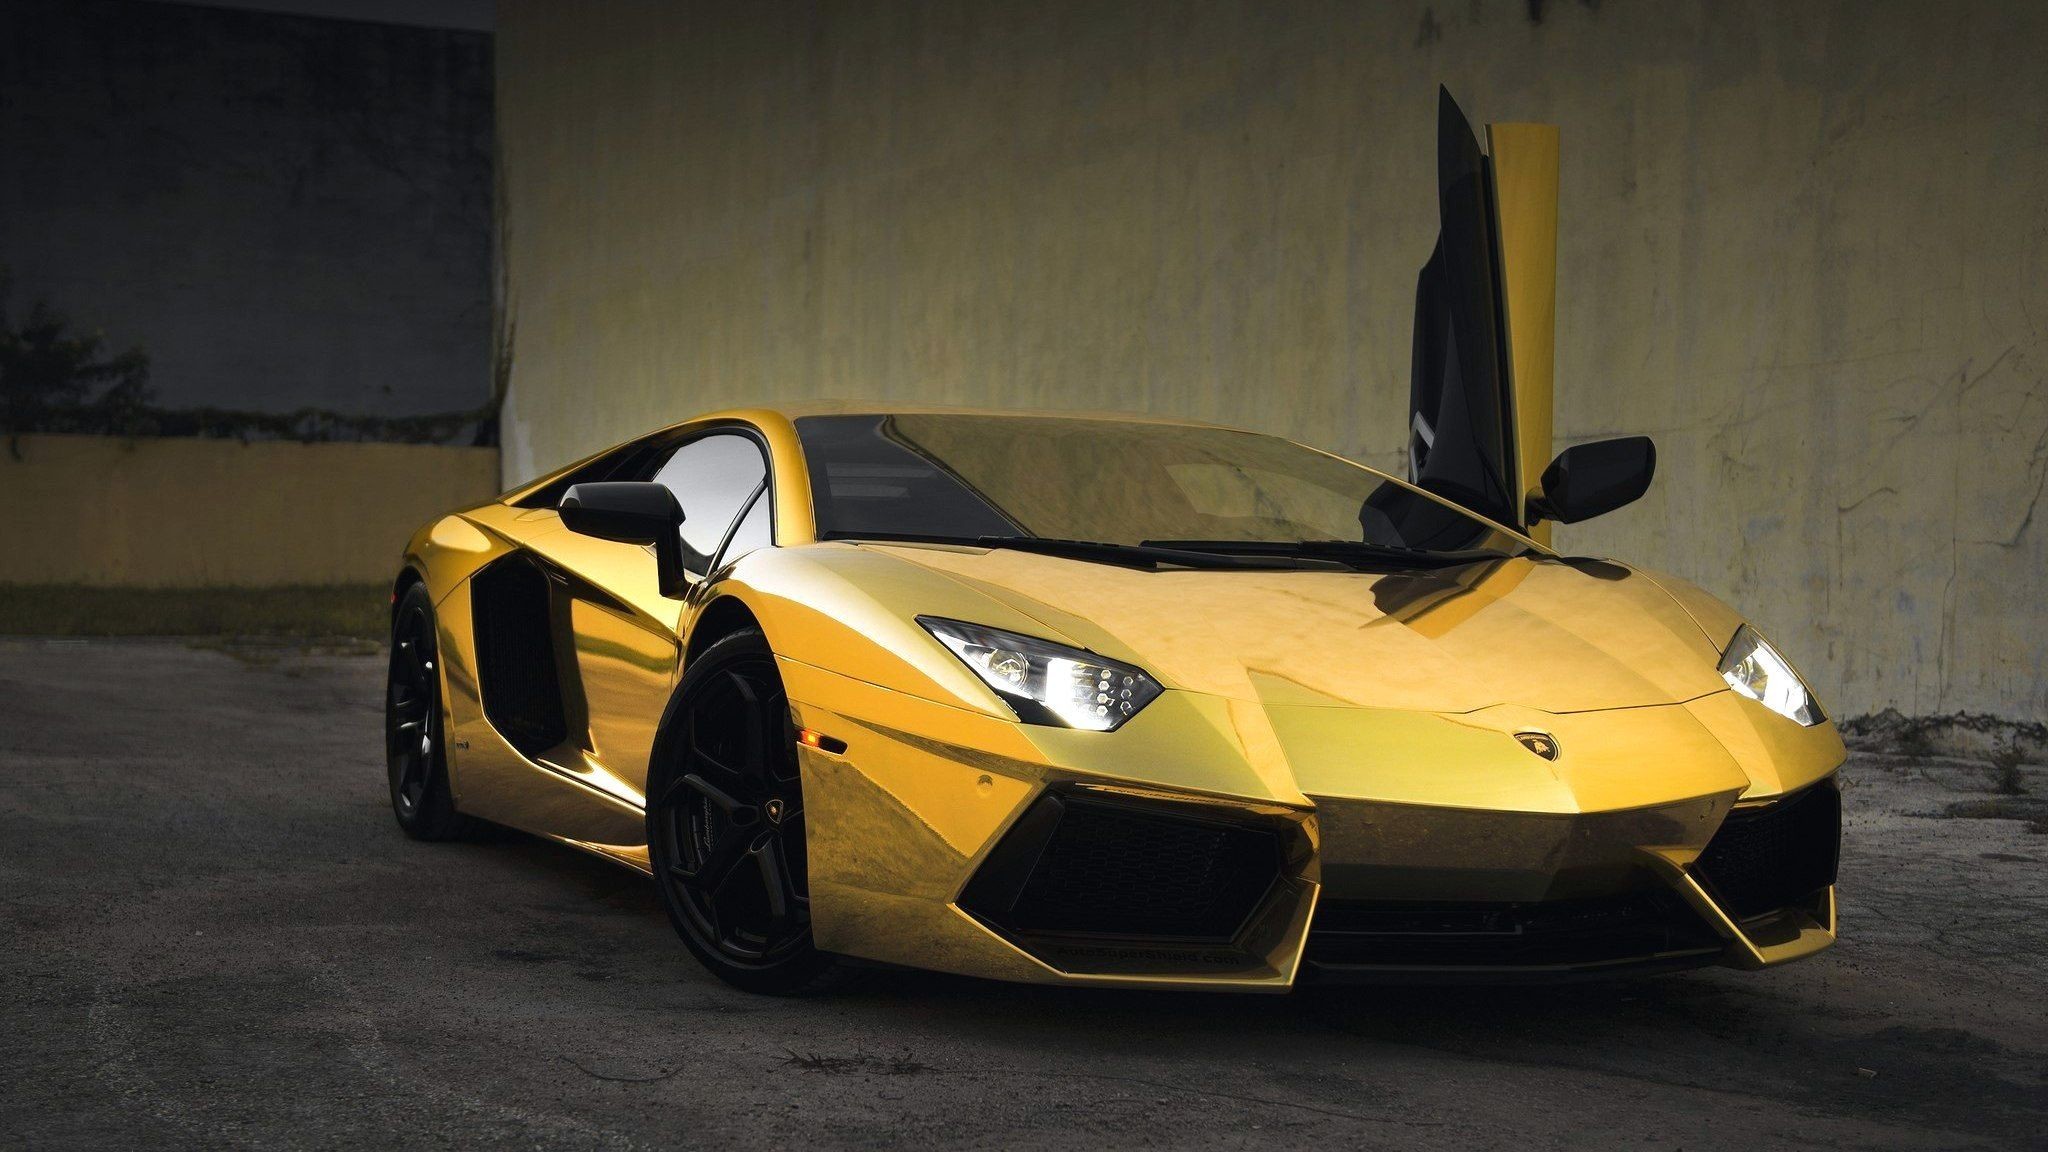 2048x1152 JNH:718 - Cool Gold Cars Wallpapers, New Gold Cars HD Wallpapers .